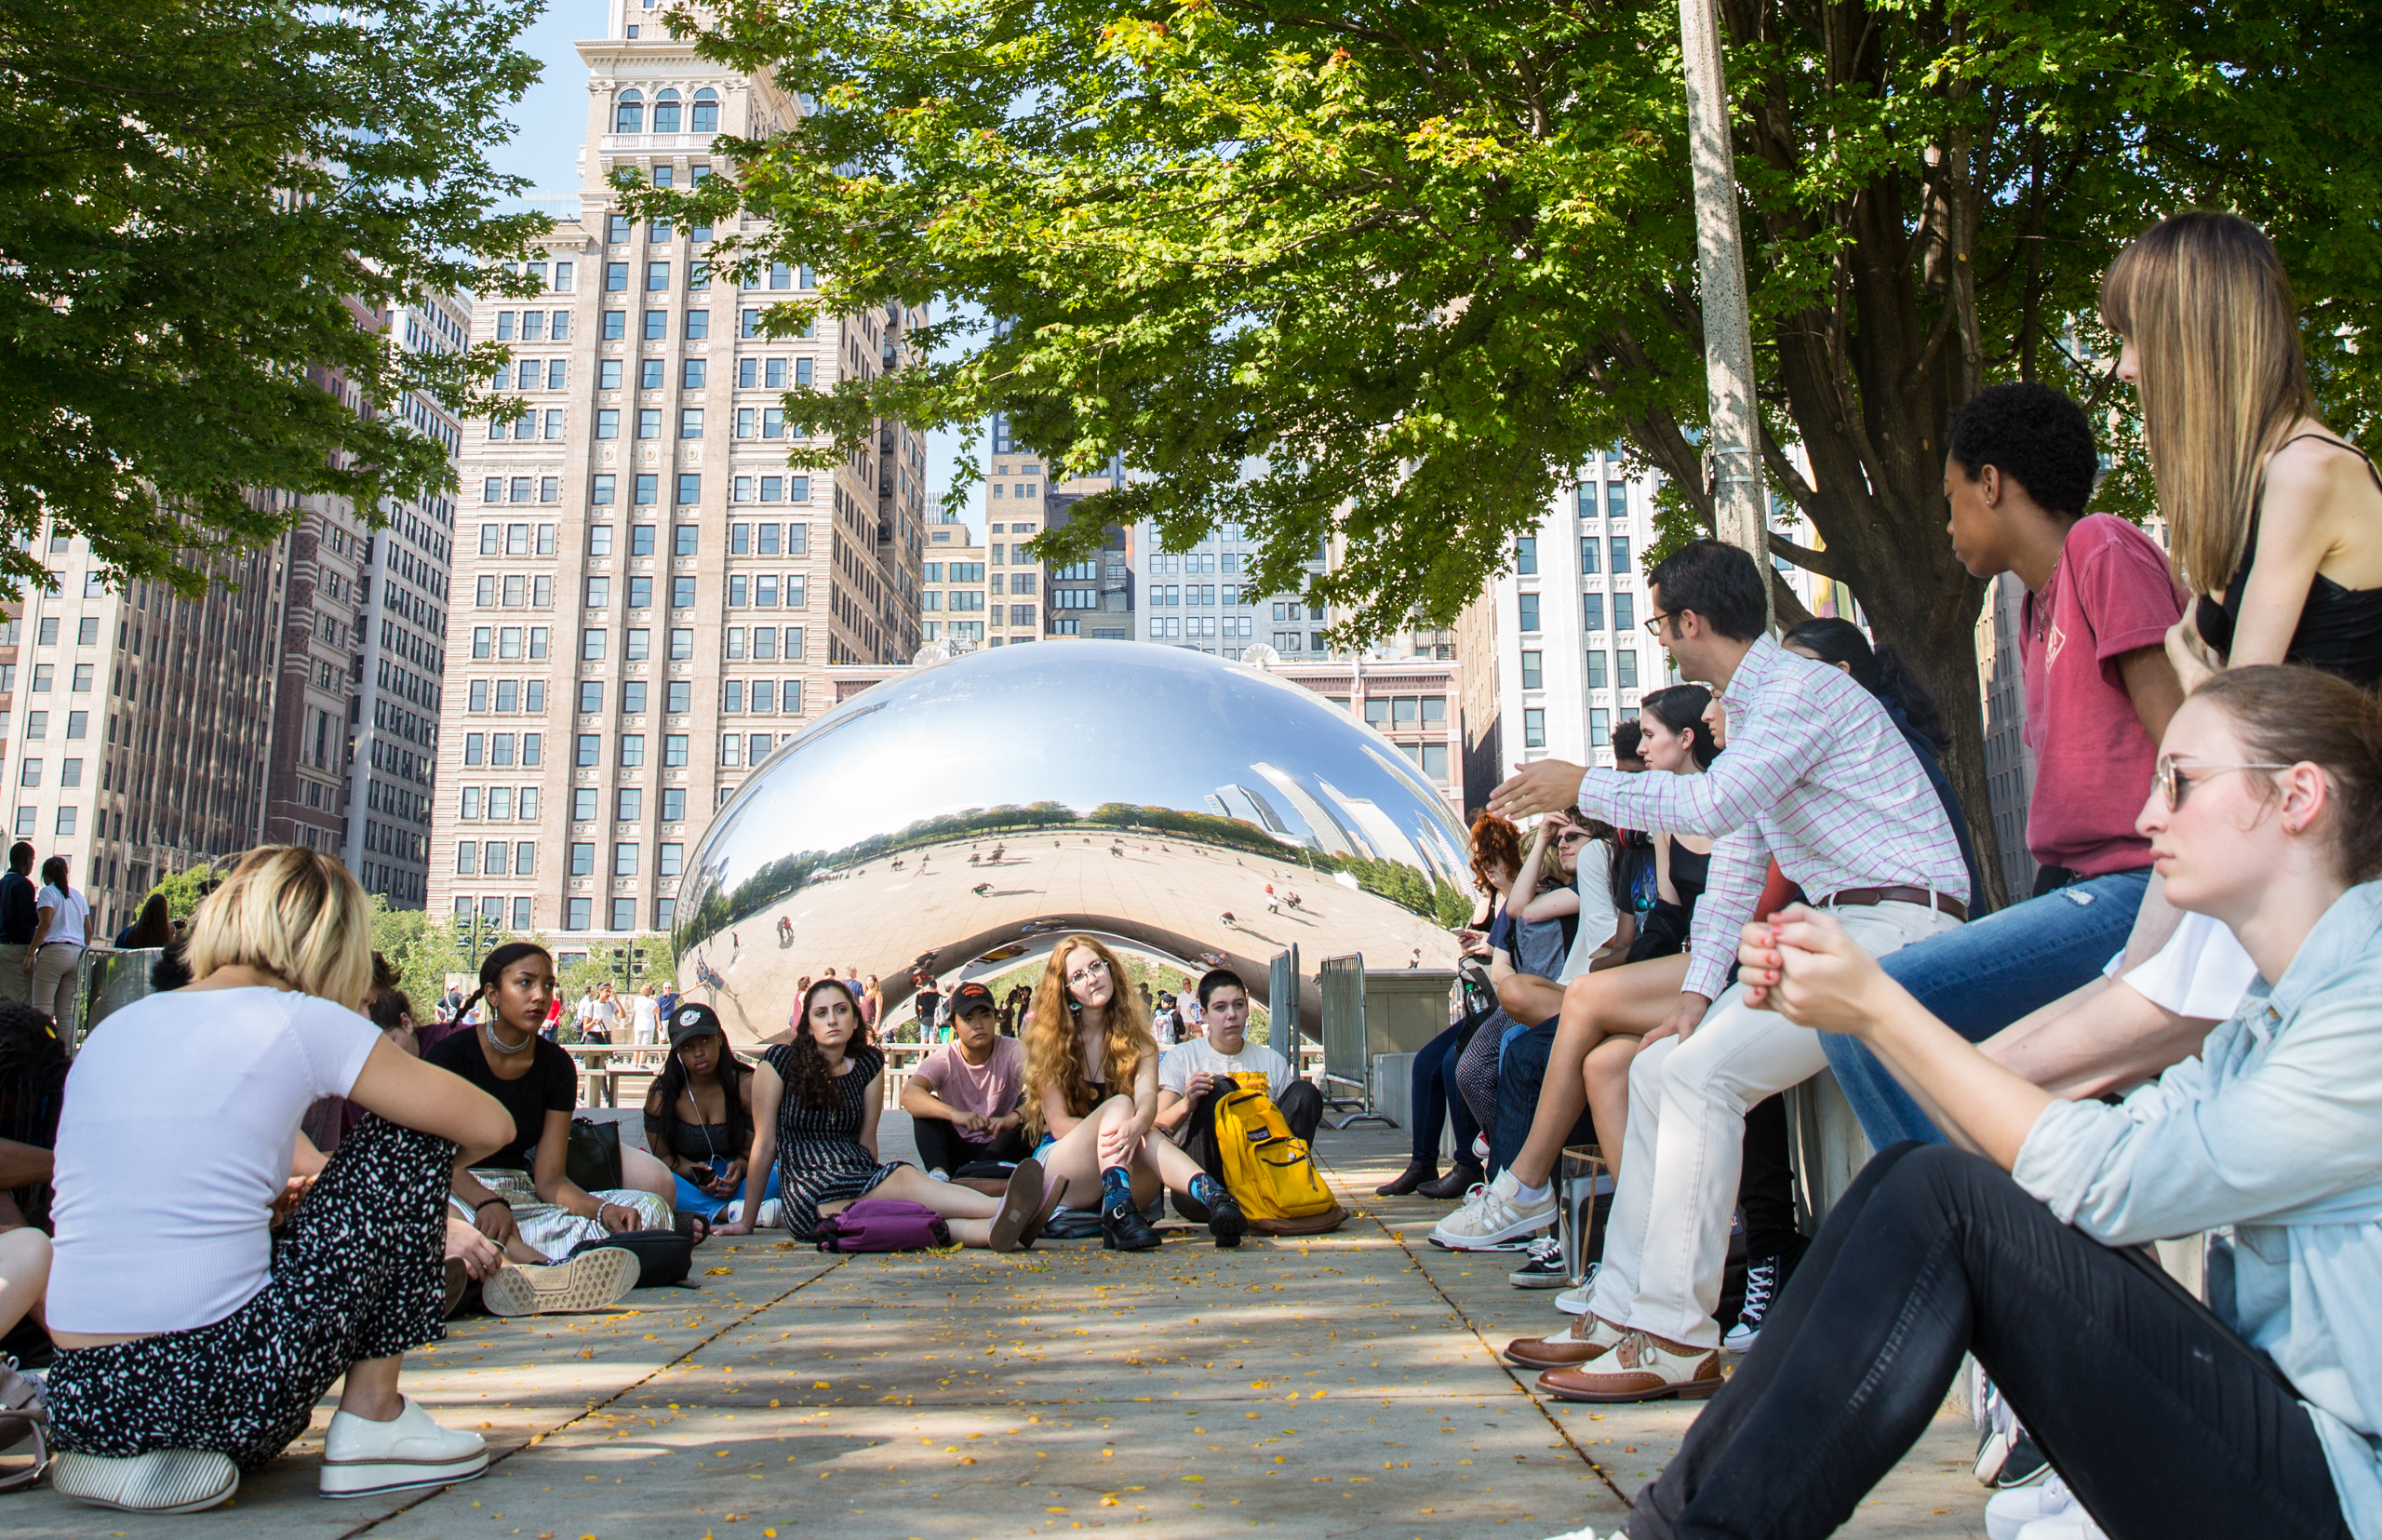 students sitting outside on a sunny day near bean shaped chrome reflective sculpture Cloud Gate in Milennnium Park